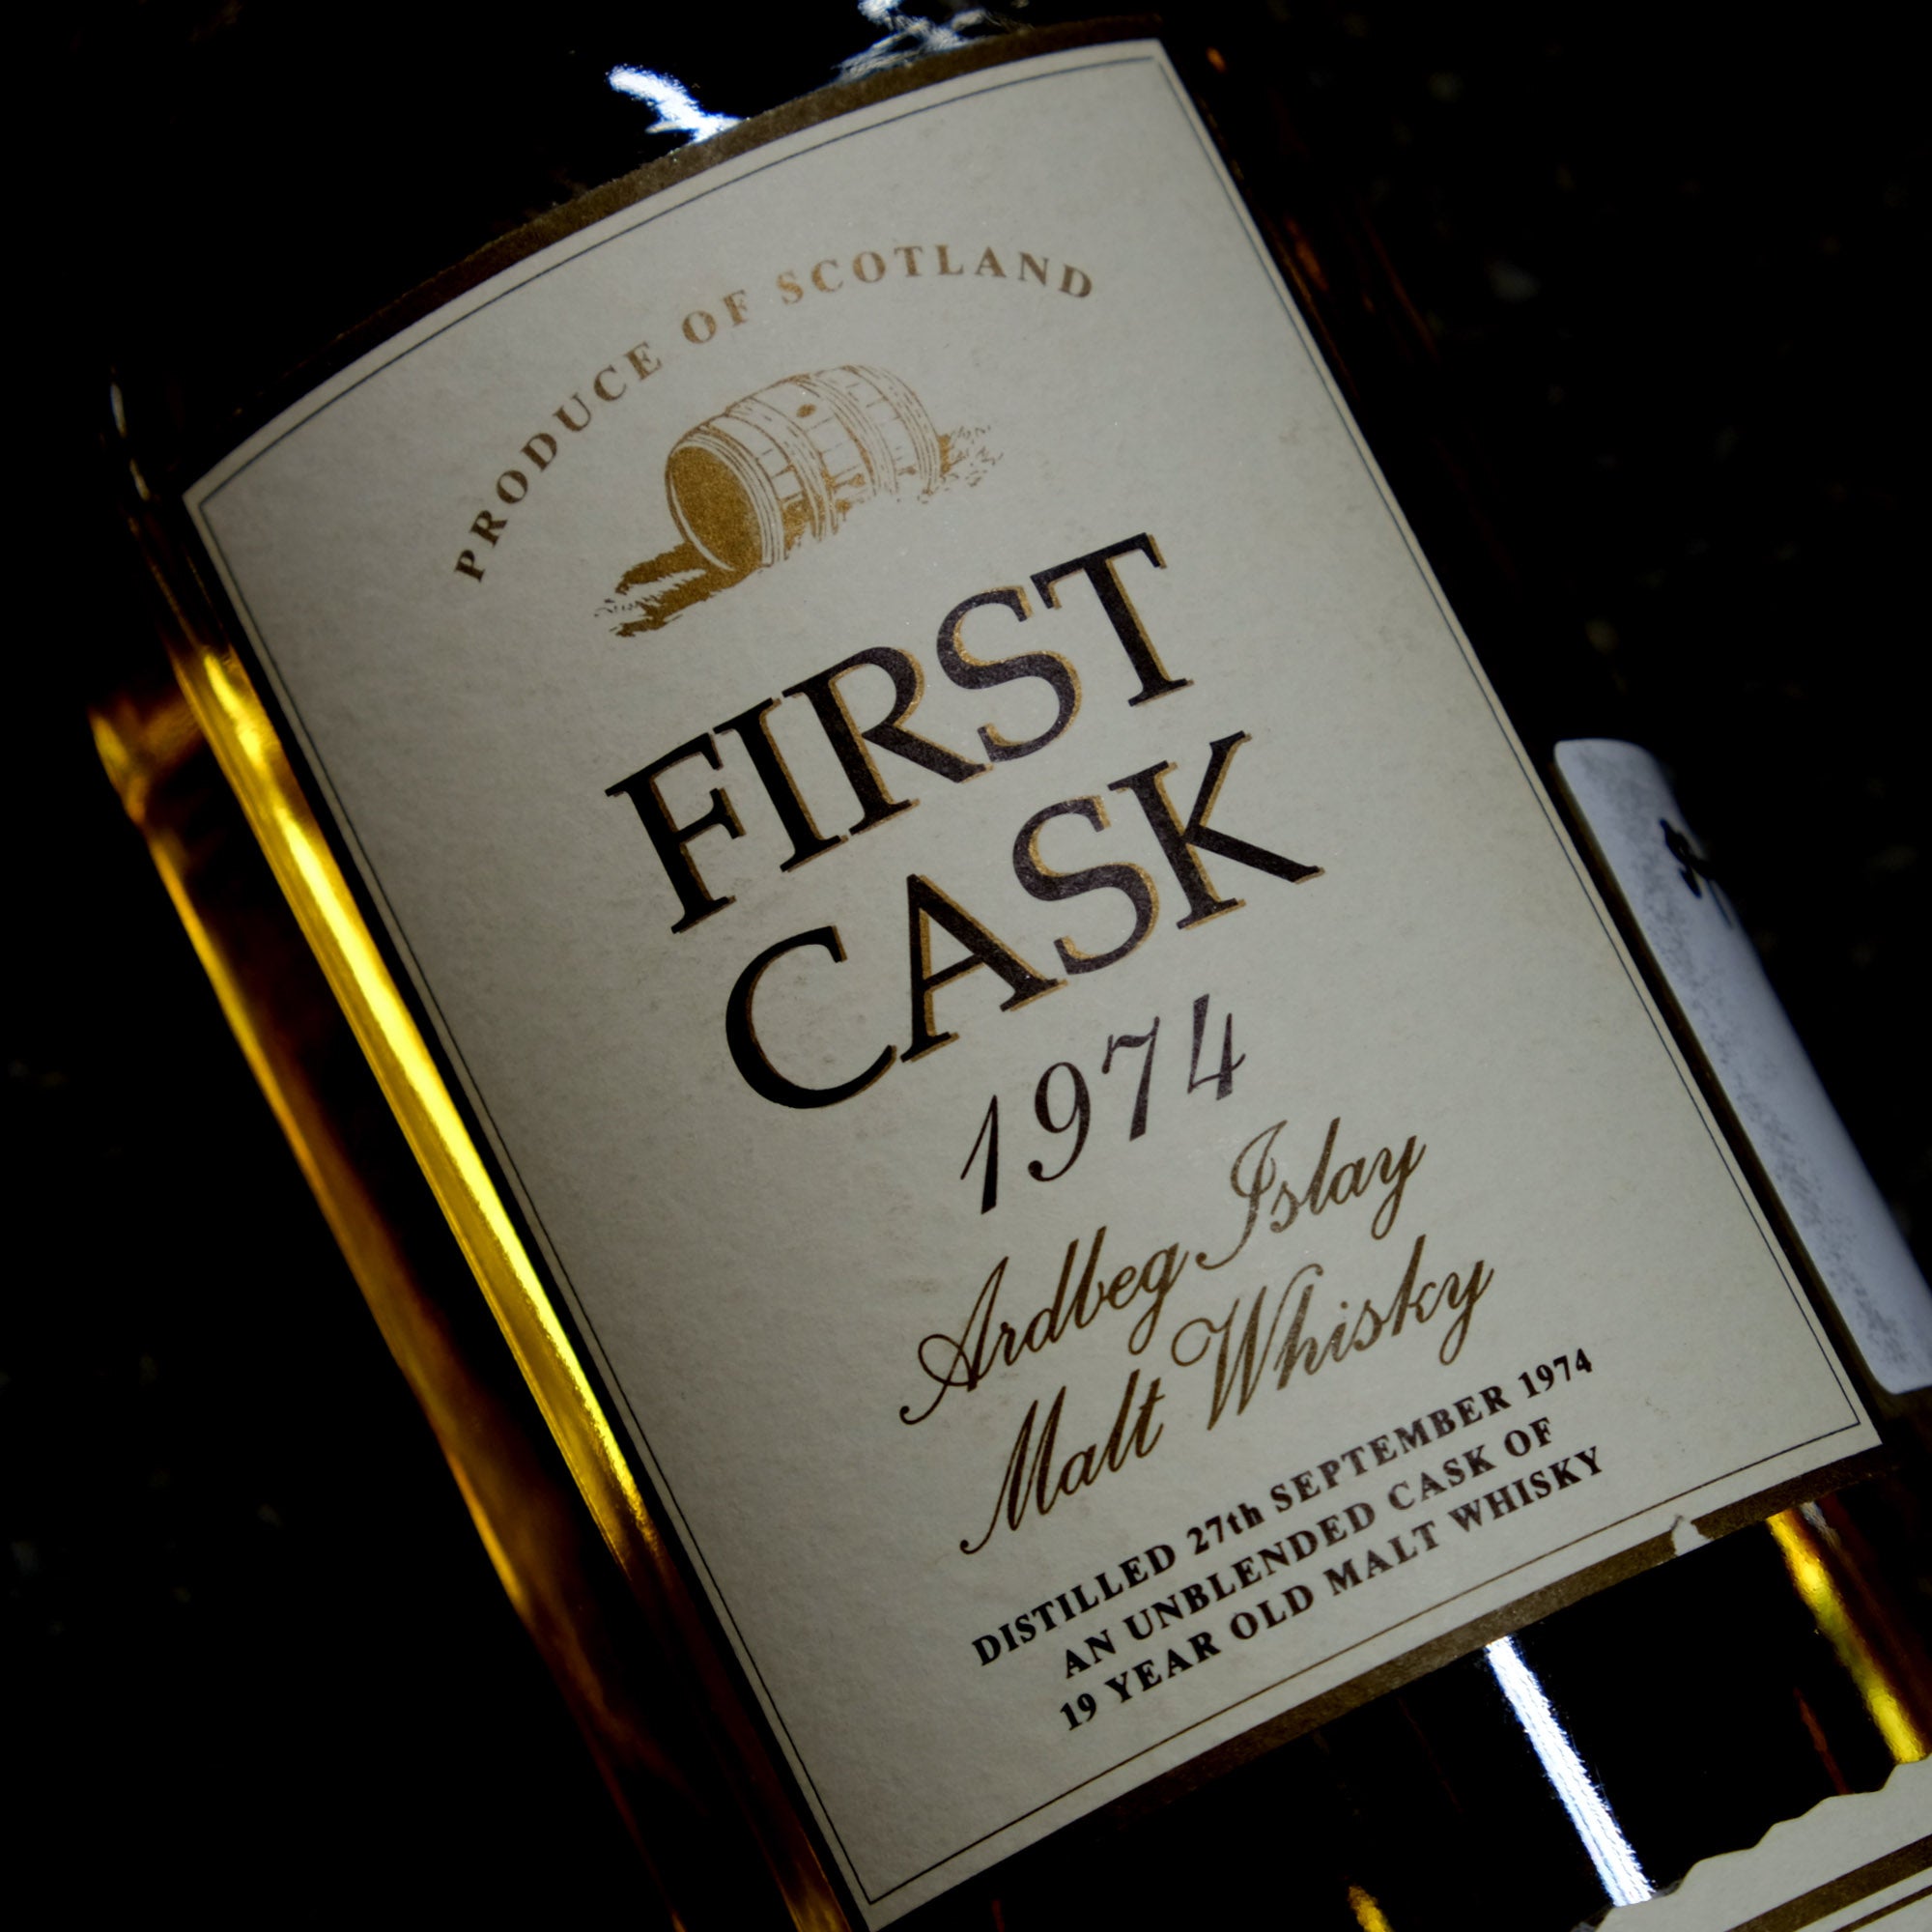 Part 3 ‘First Cask’ Whisky Tasting - Old & Rare With Whisky-Online Auctions